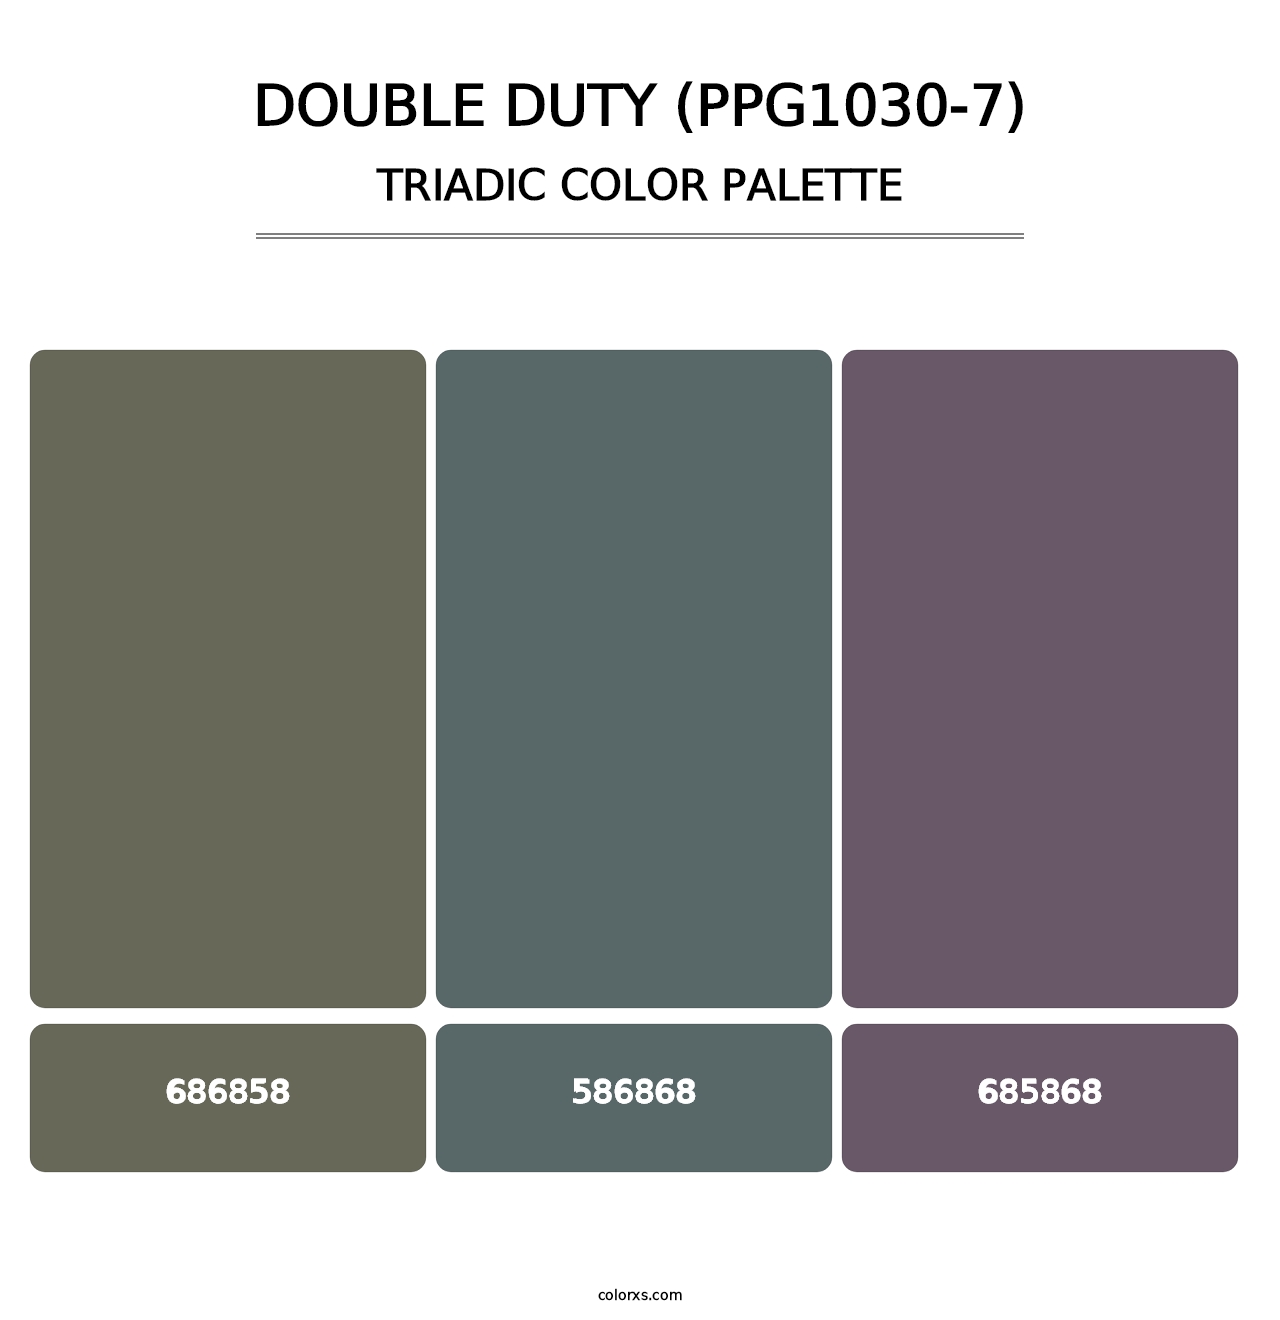 Double Duty (PPG1030-7) - Triadic Color Palette